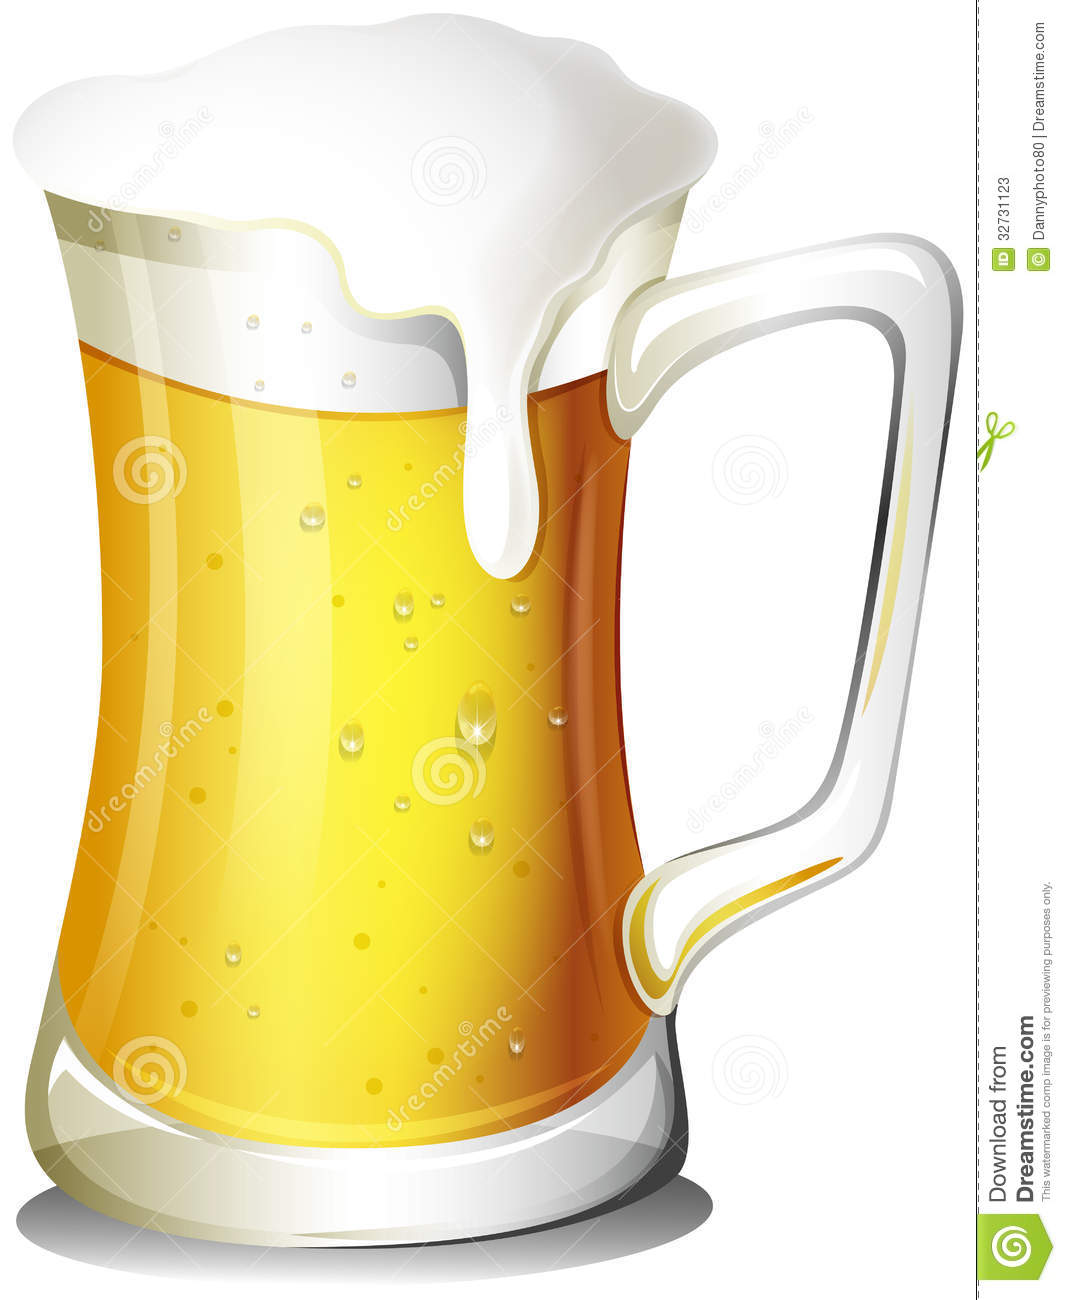 Beer glass clipart 20 free Cliparts | Download images on ...